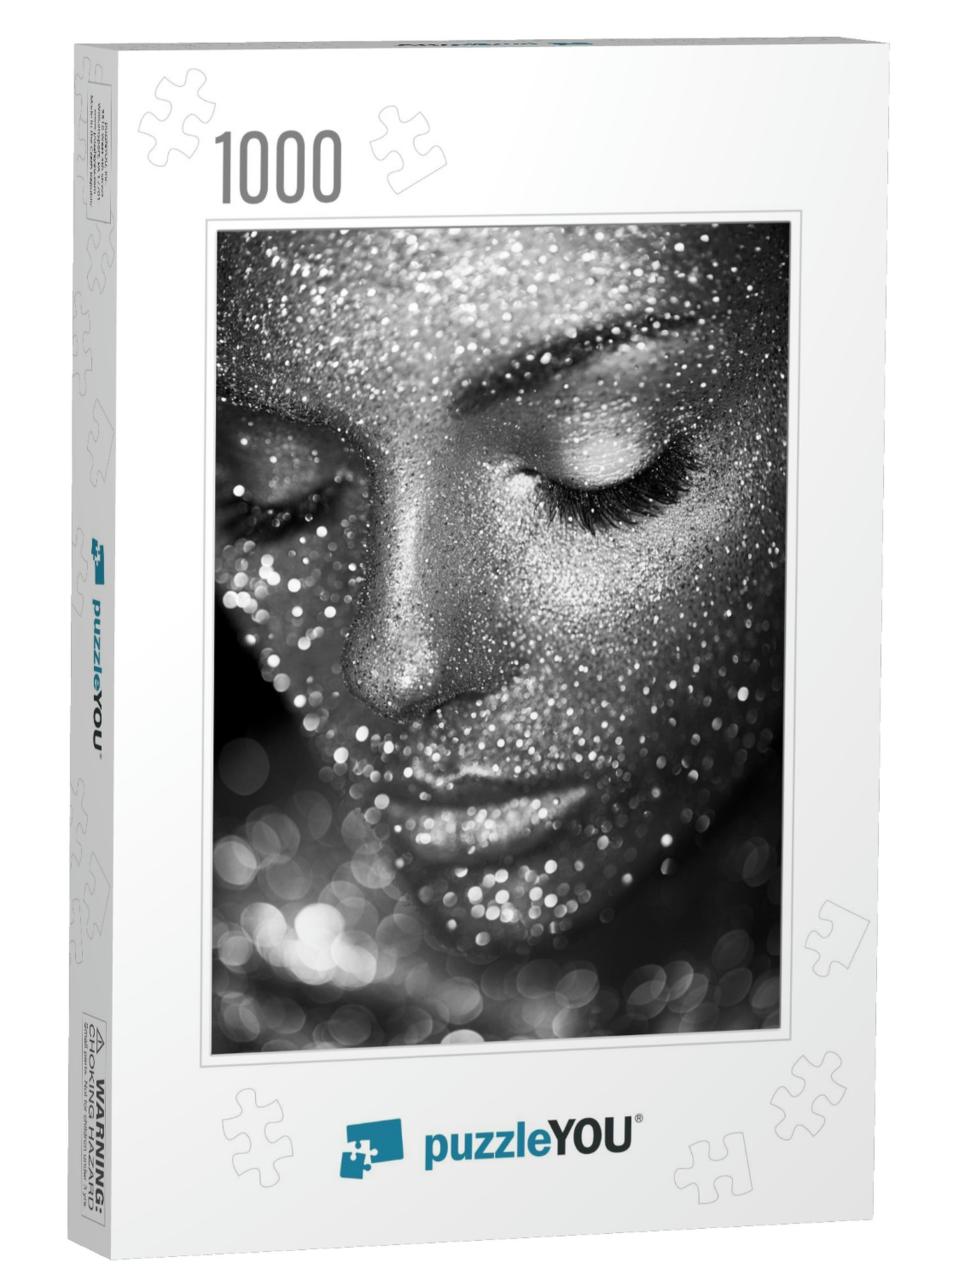 Fashion Model Woman in Bright Sparkles & Lights Posing in... Jigsaw Puzzle with 1000 pieces